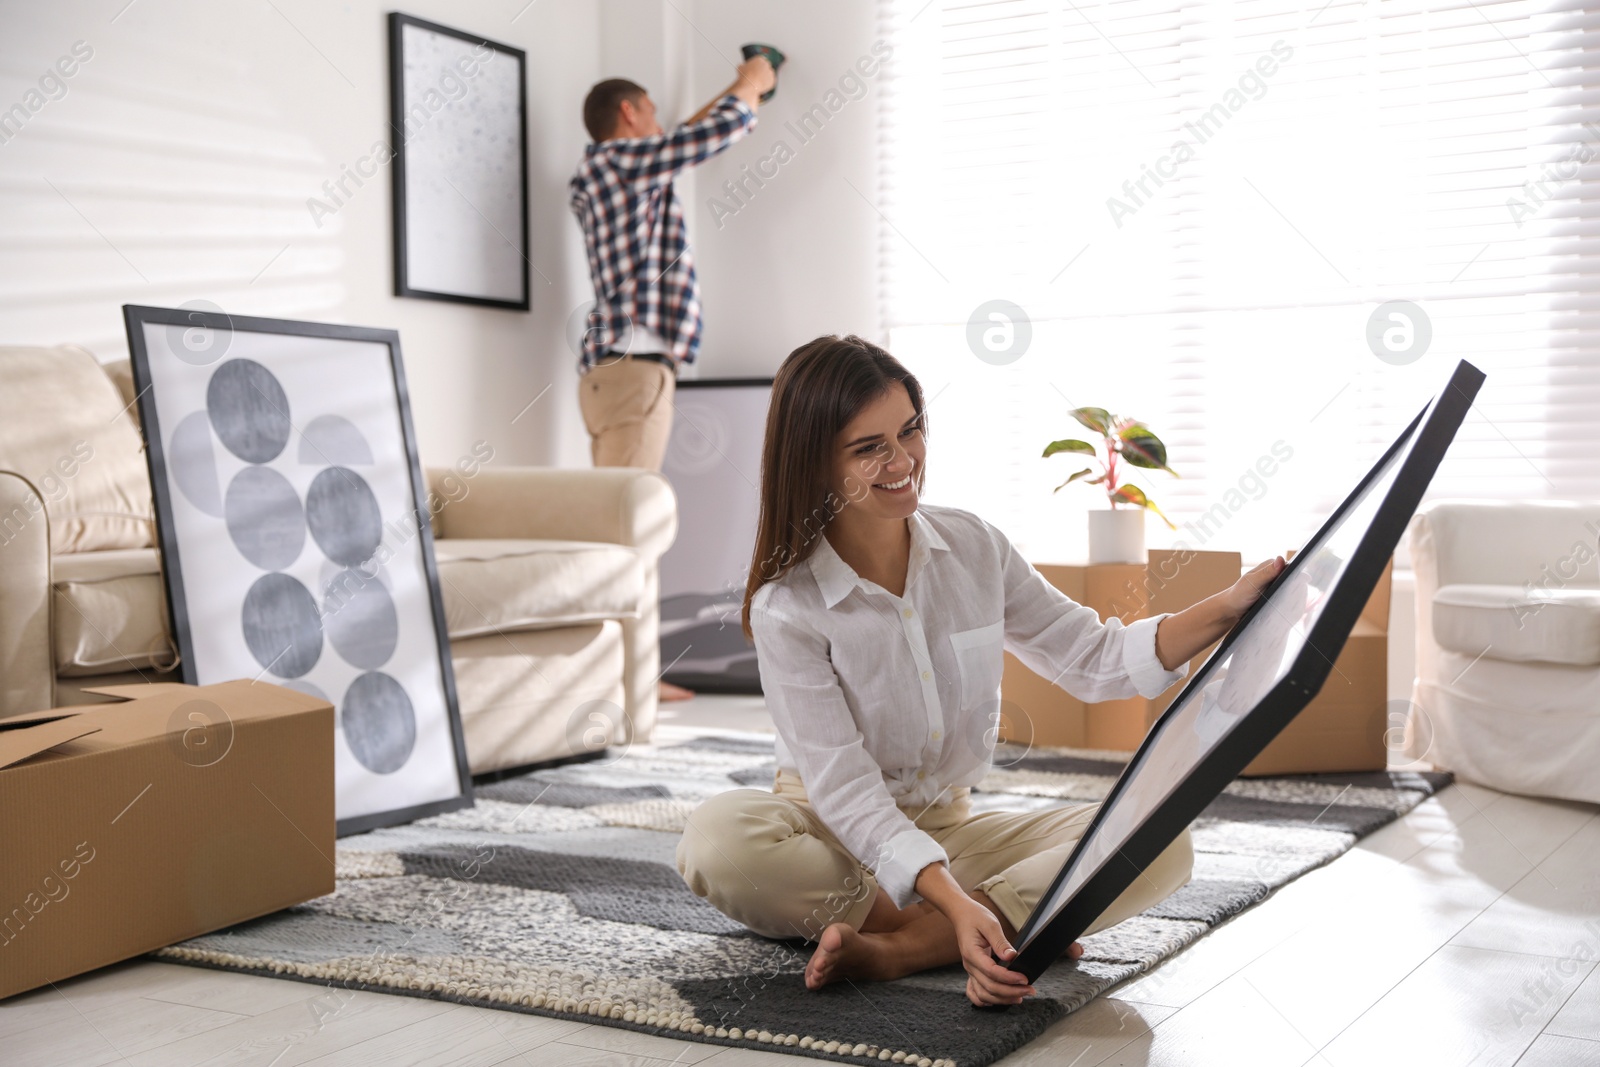 Photo of Happy couple decorating room with pictures together. Interior design